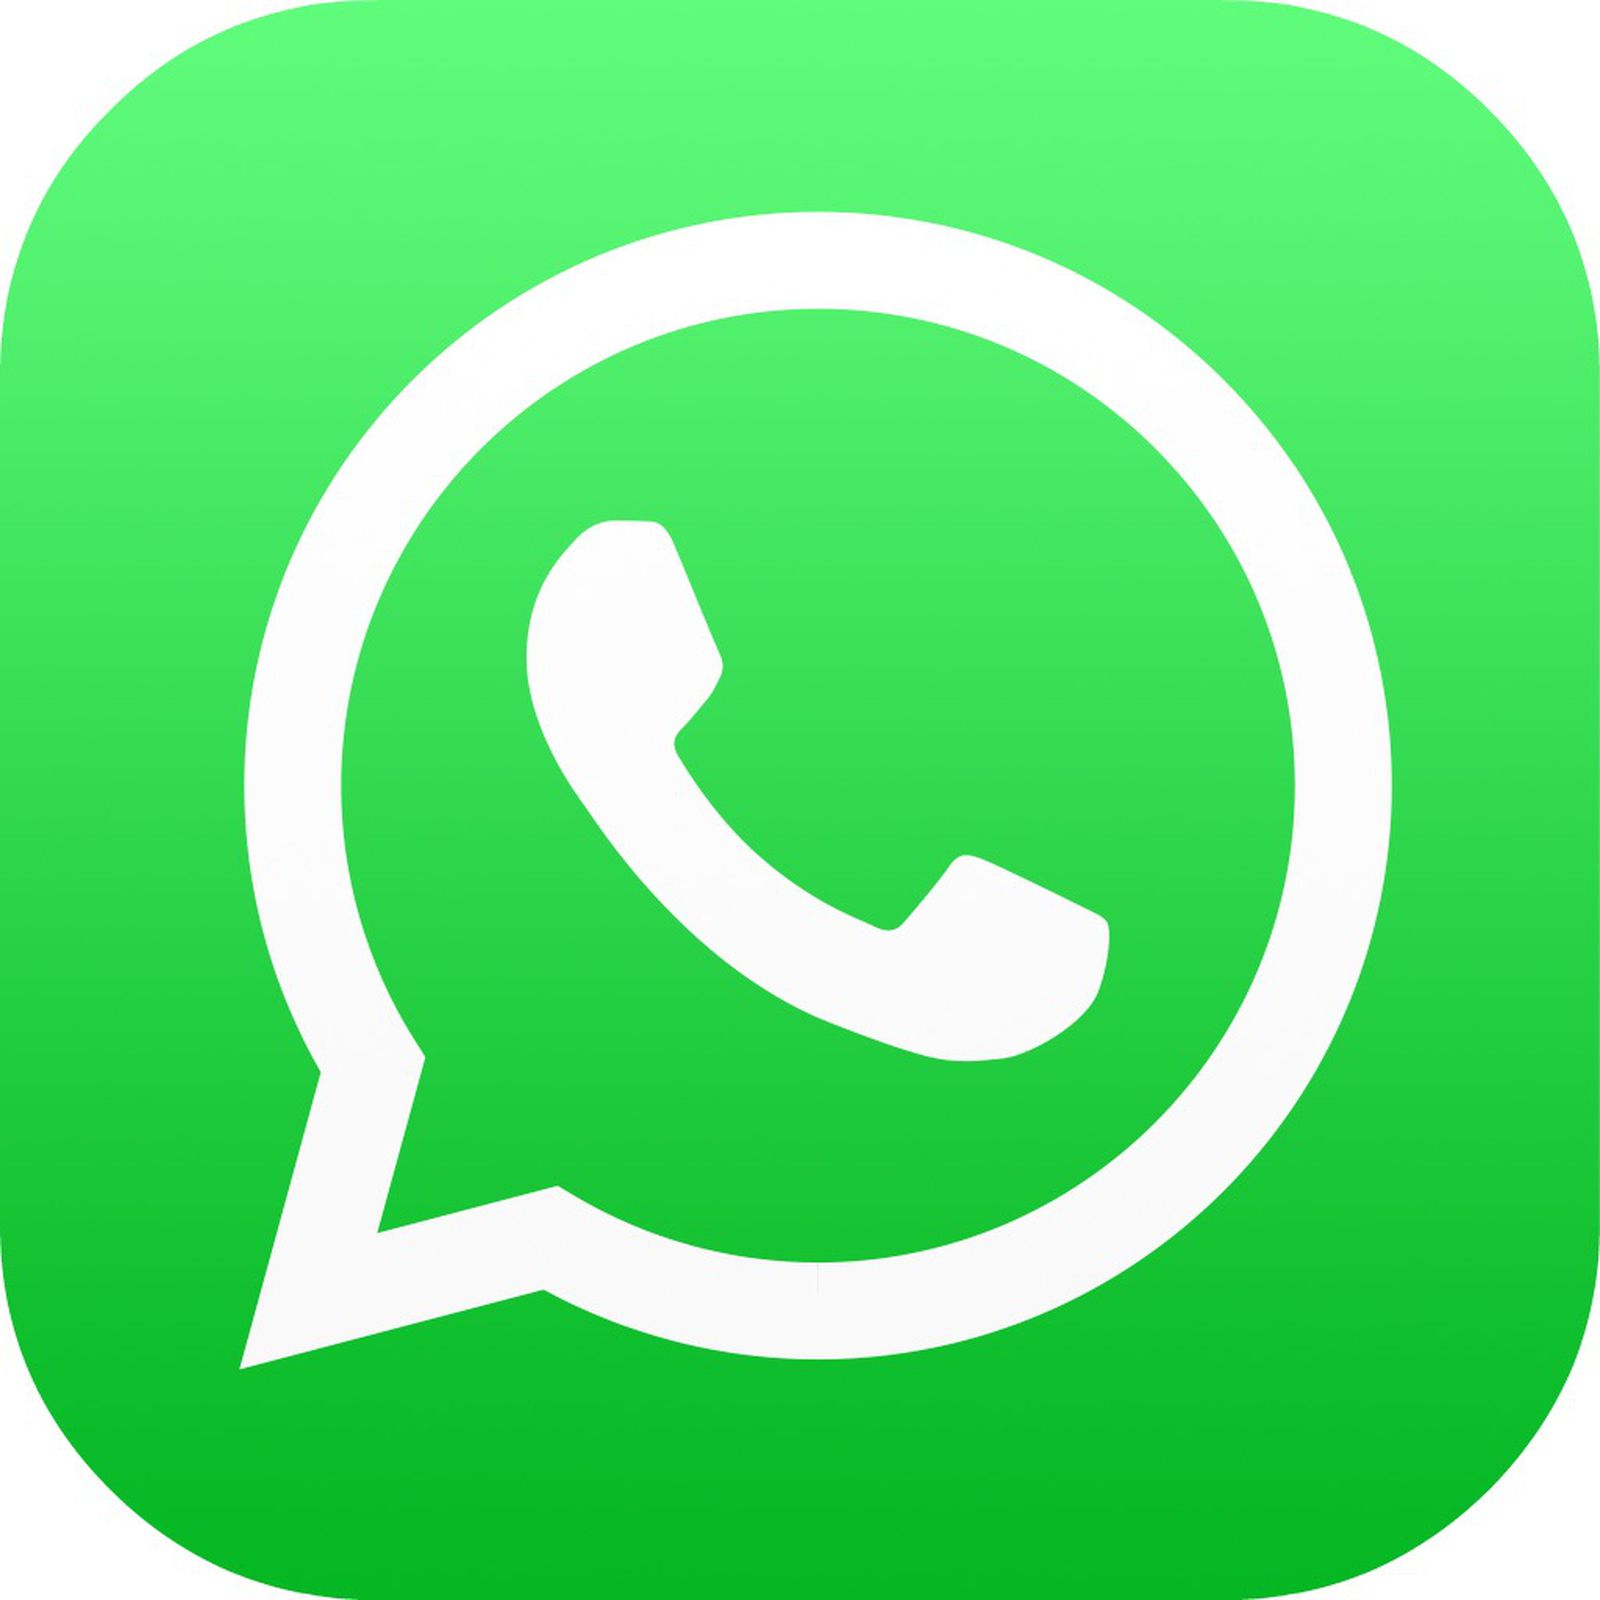 WhatsApp confirms user privacy after backlash over sharing data with Facebook